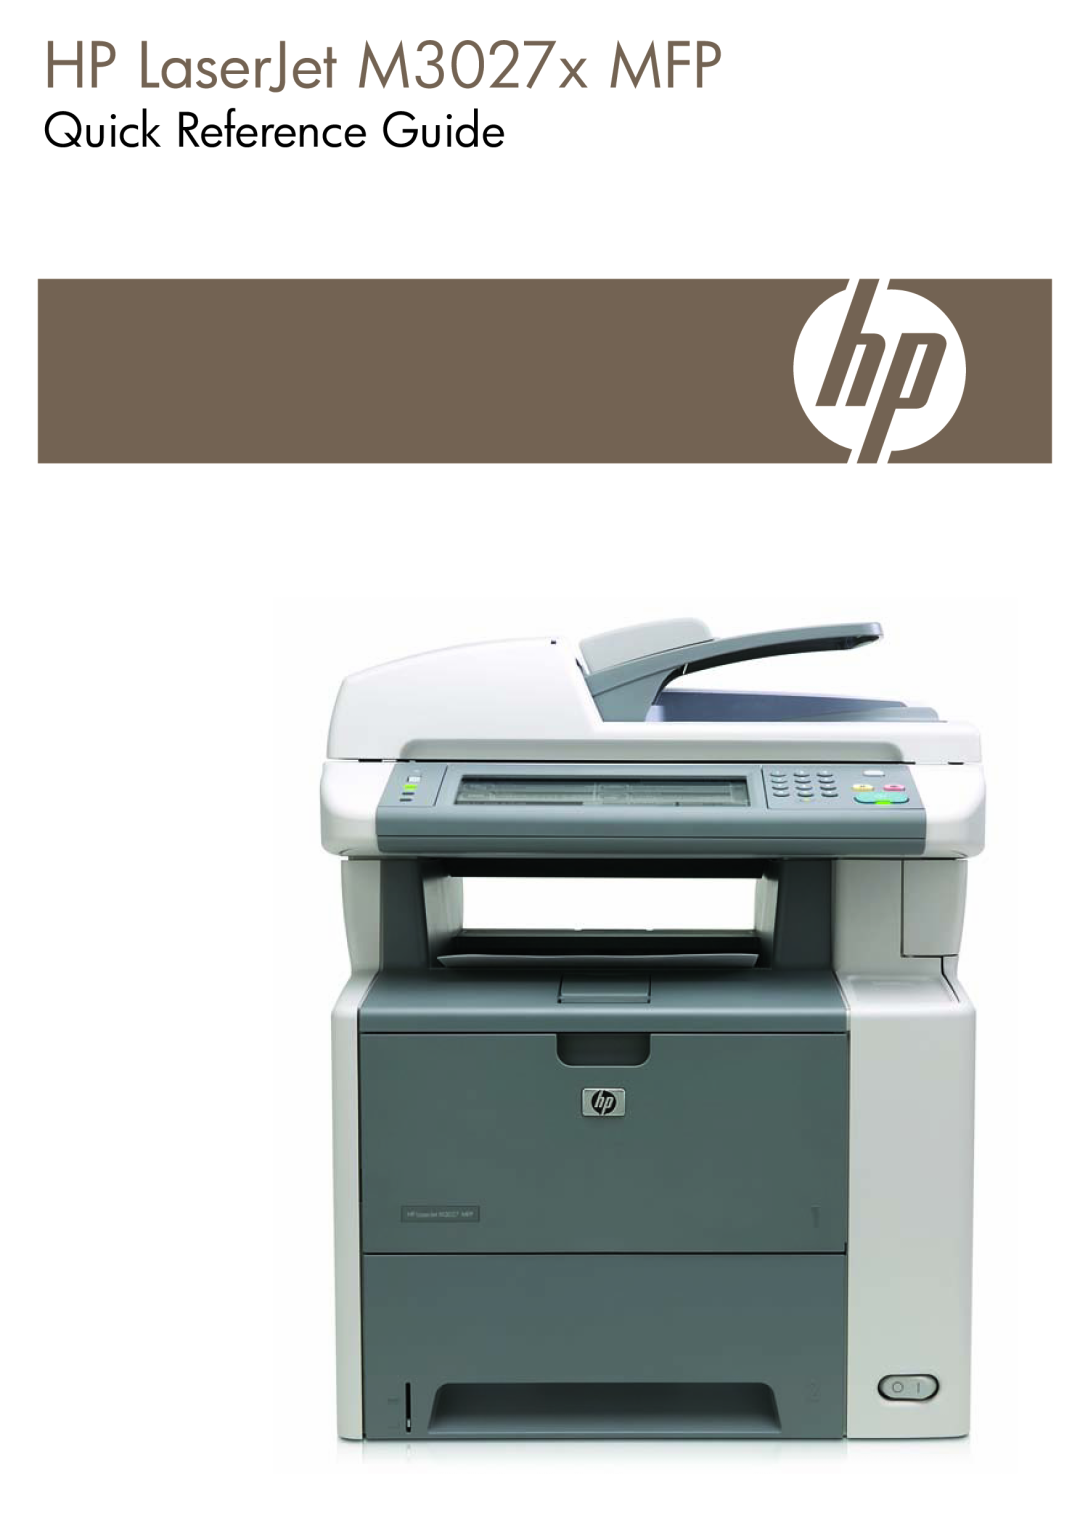 HP manual HP LaserJet M3027x MFP, Quick Reference Guide 